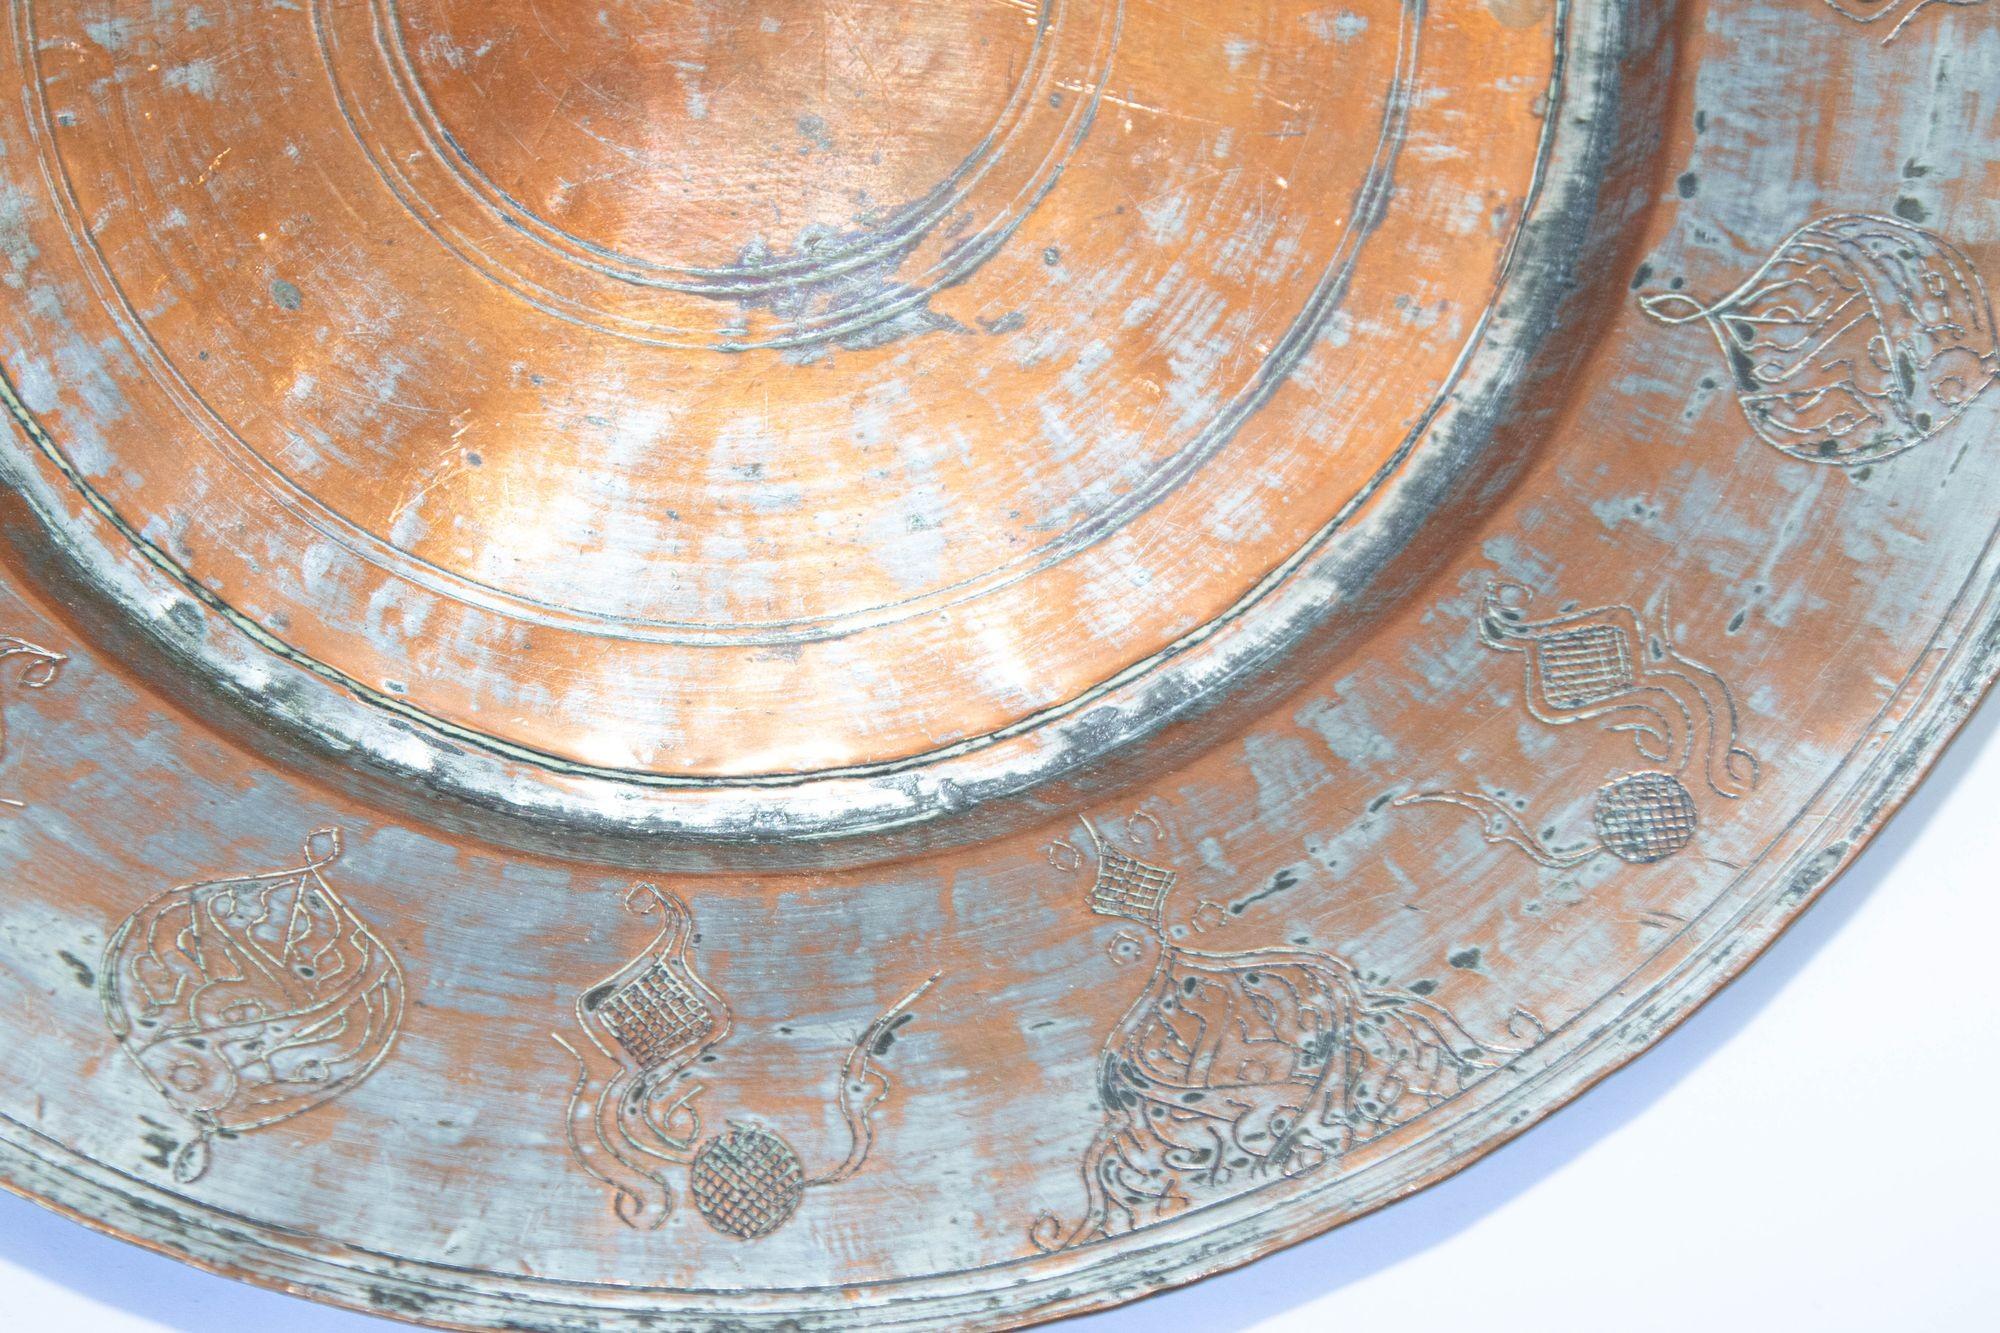 Large Antique Tinned Copper Rajasthani Vessel Bowl 7